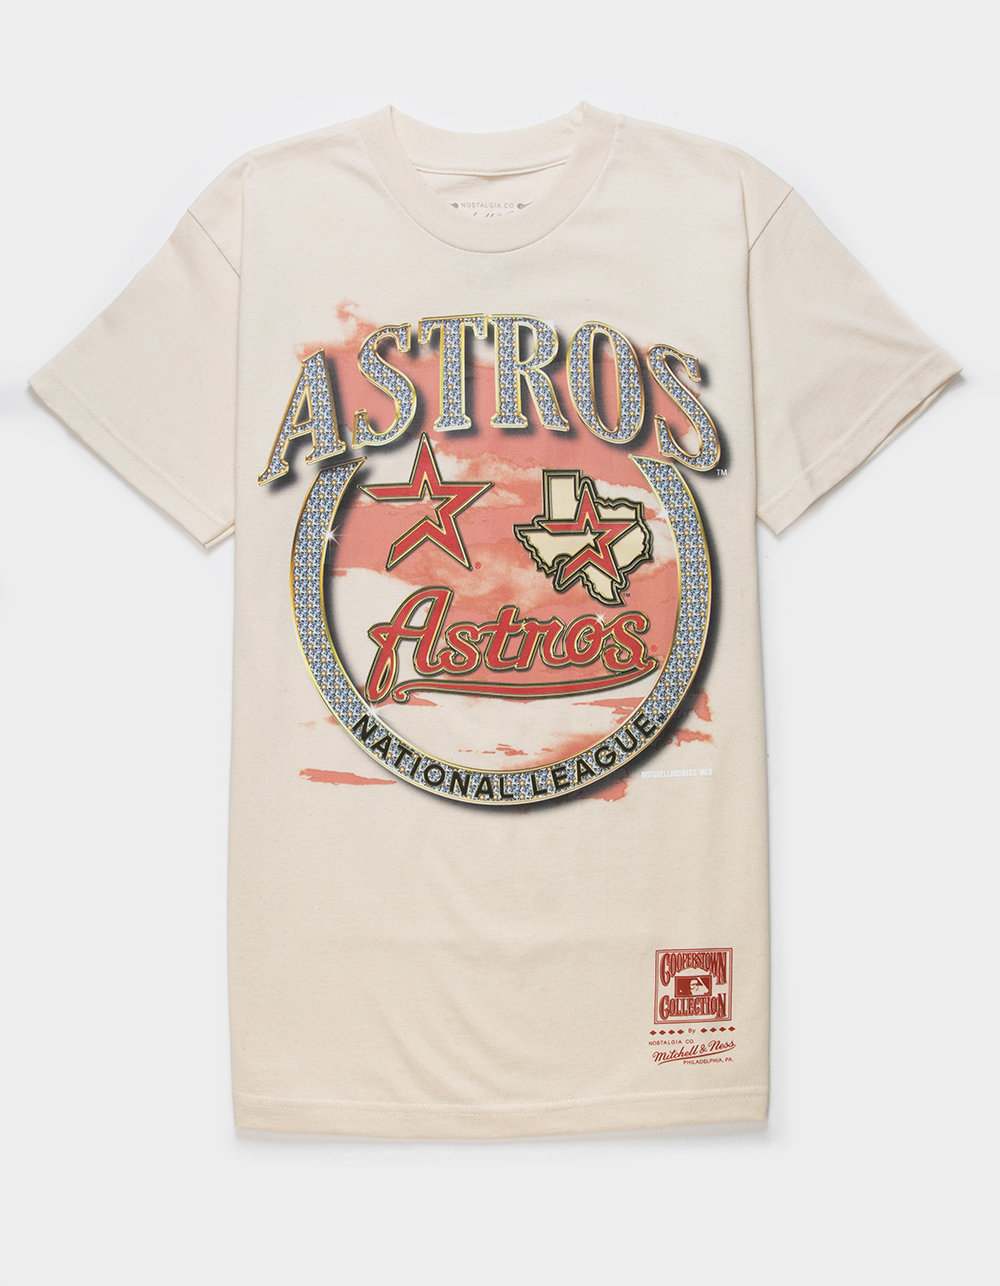 MITCHELL & NESS Houston Astros Crown Jewels Mens Tee